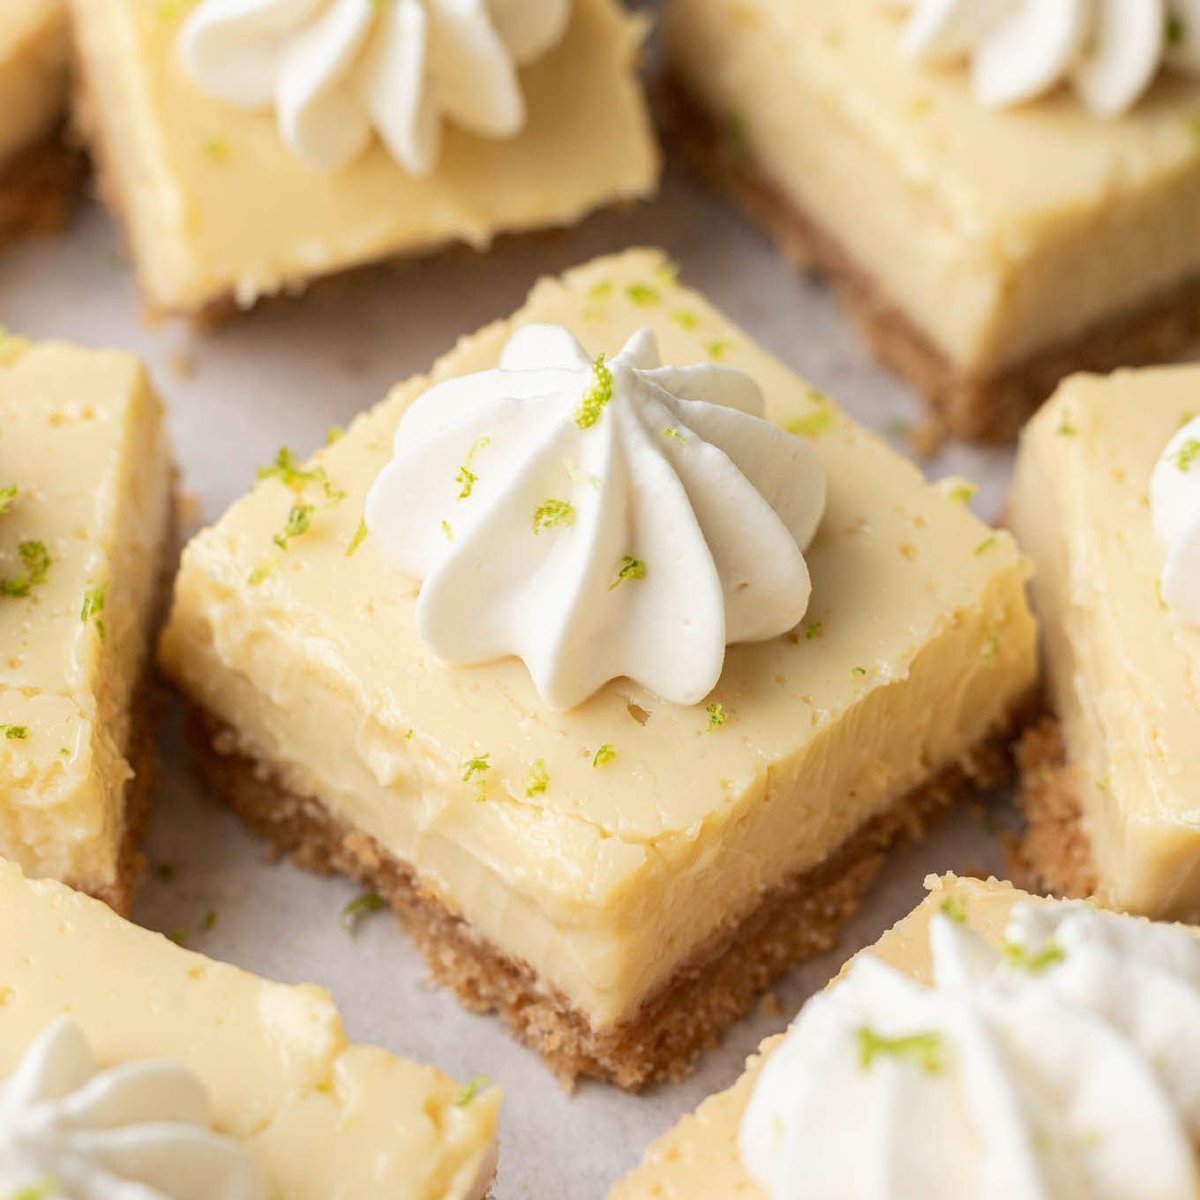 These Key Lime Bars taste like the classic pie, but in bar form! The filling is extra creamy thanks to the addition of cream cheese, and a dollop of whipped cream on top is the perfect finishing touch. #keylimepie #piebars #keylime #dessert 
buff.ly/3uLseH6